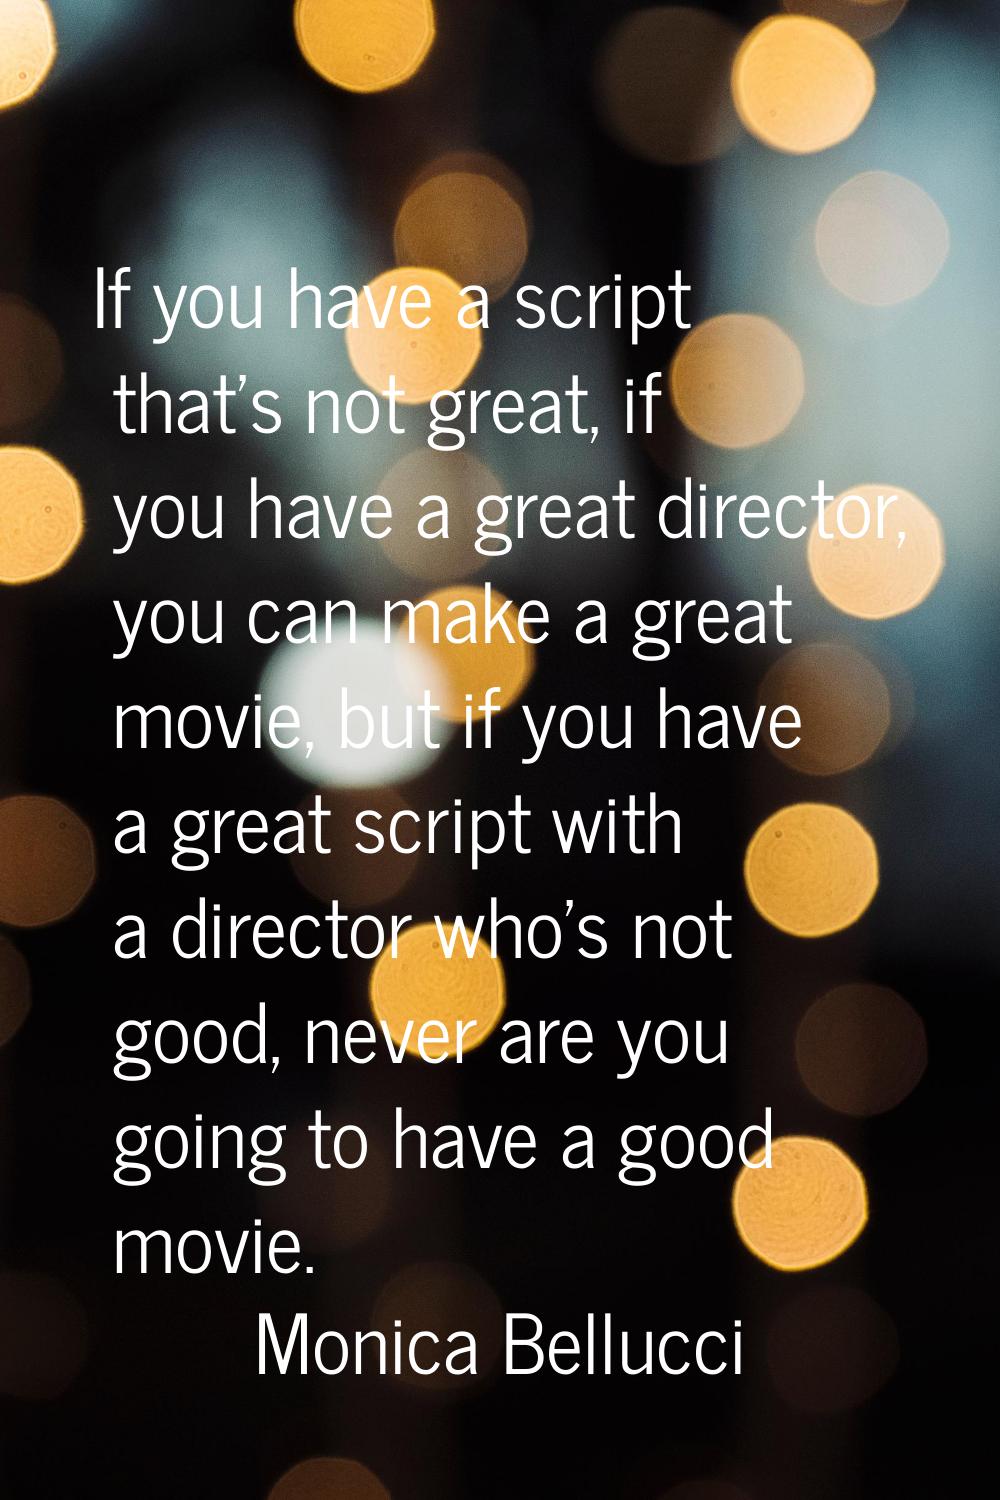 If you have a script that's not great, if you have a great director, you can make a great movie, bu